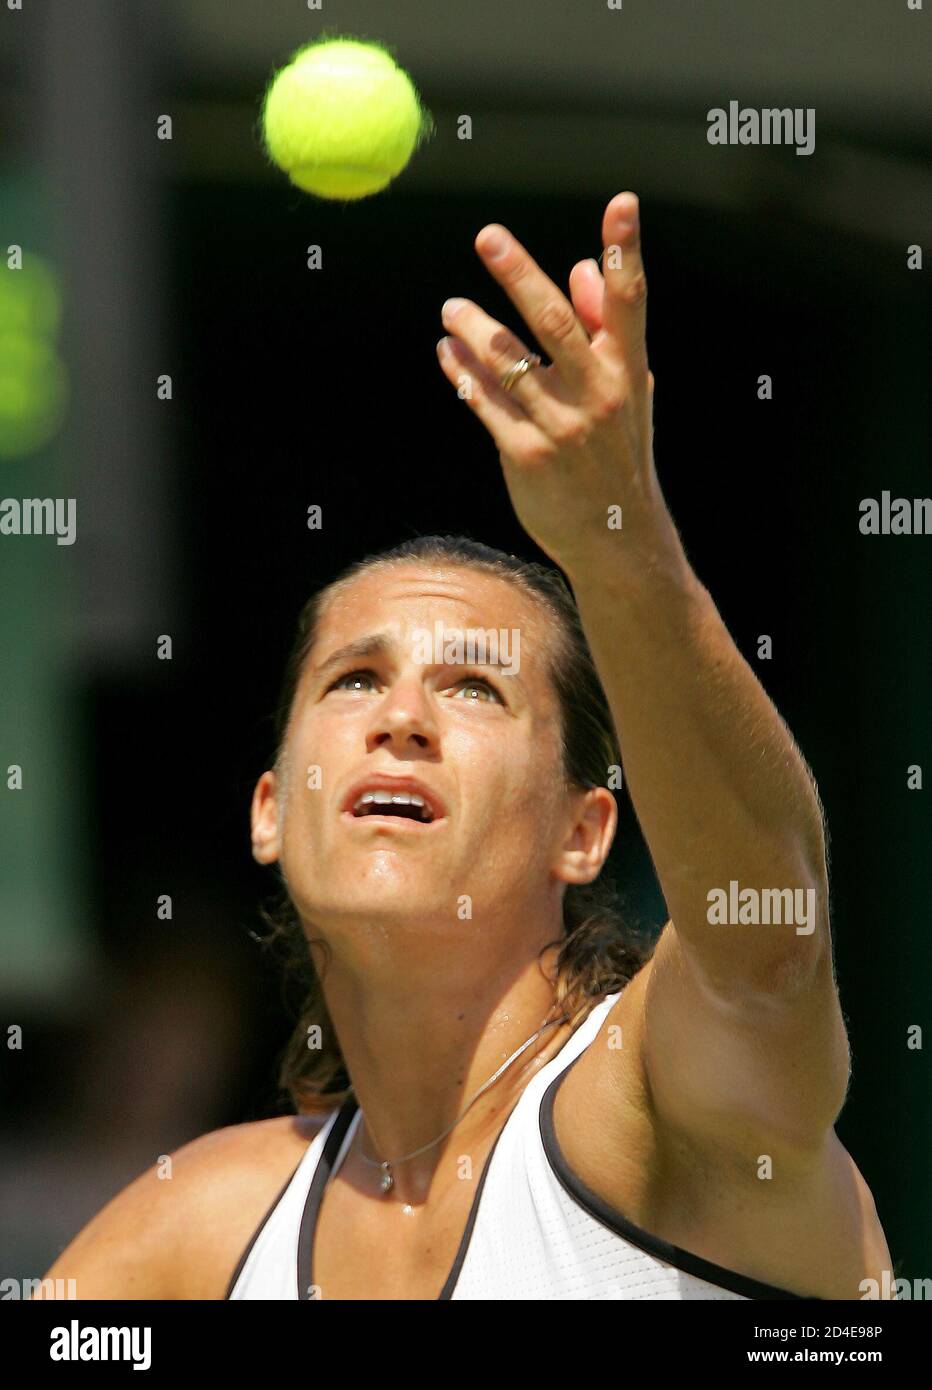 Amelie Mauresmo of France serves to Spain's Maria Sanchez Lorenzo in their second round women's singles match at the Wimbledon tennis championships in London June 22, 2005. Mauresmo won the match 6-1 6-3. REUTERS/Toby Melville  RD/dh Stock Photo